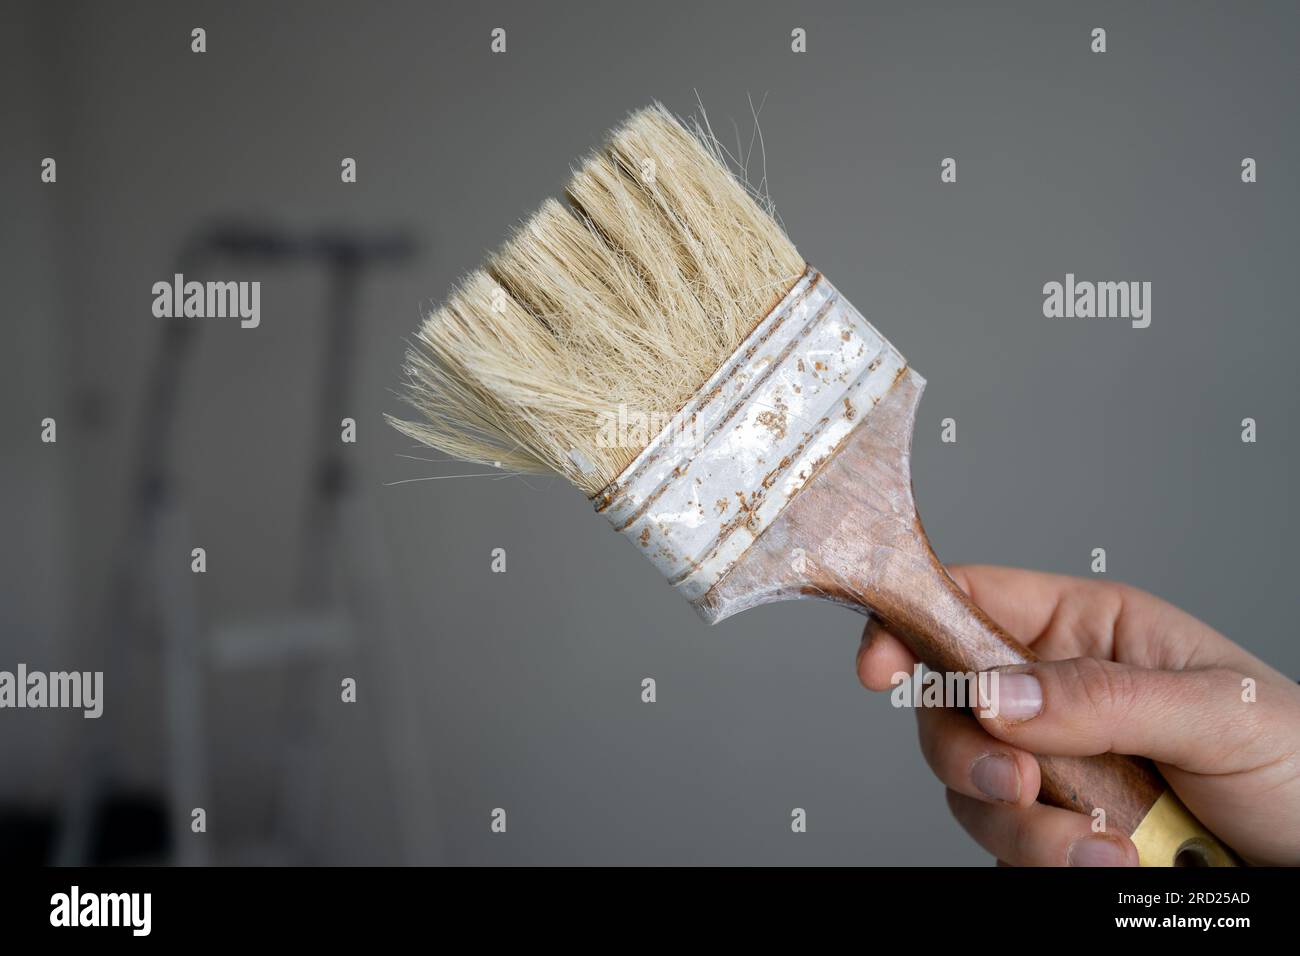 Hand holding decorators' brush for painting and decorating of buildings, home interior walls. House painter, decorator in apartment during renovation. Stock Photo